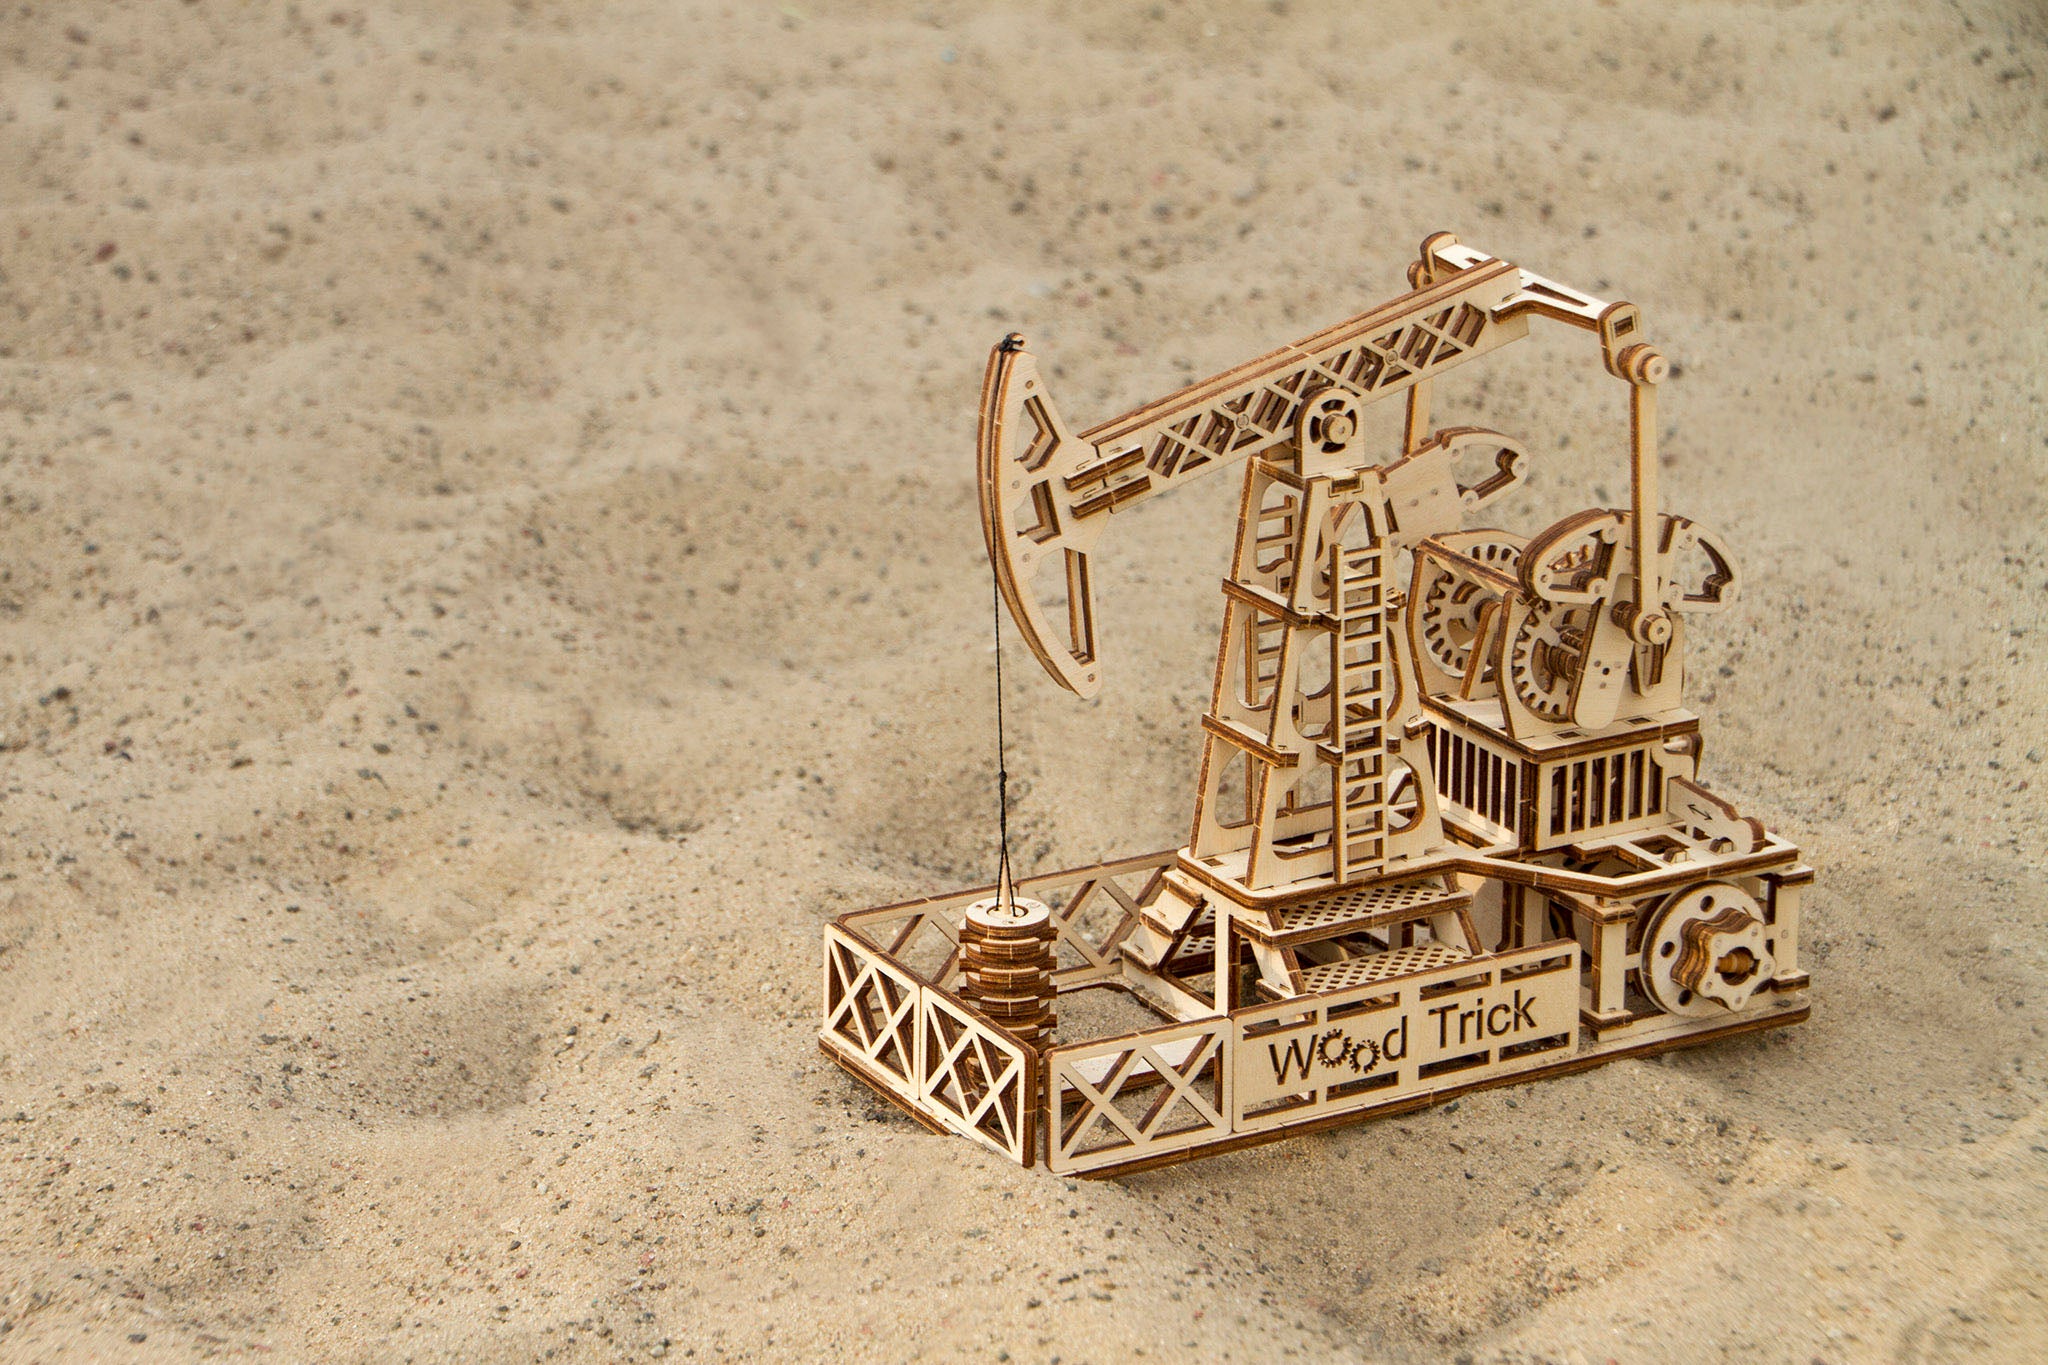 Oil Derrick - One of the most complicated Woodtrick's wooden mechanical model.